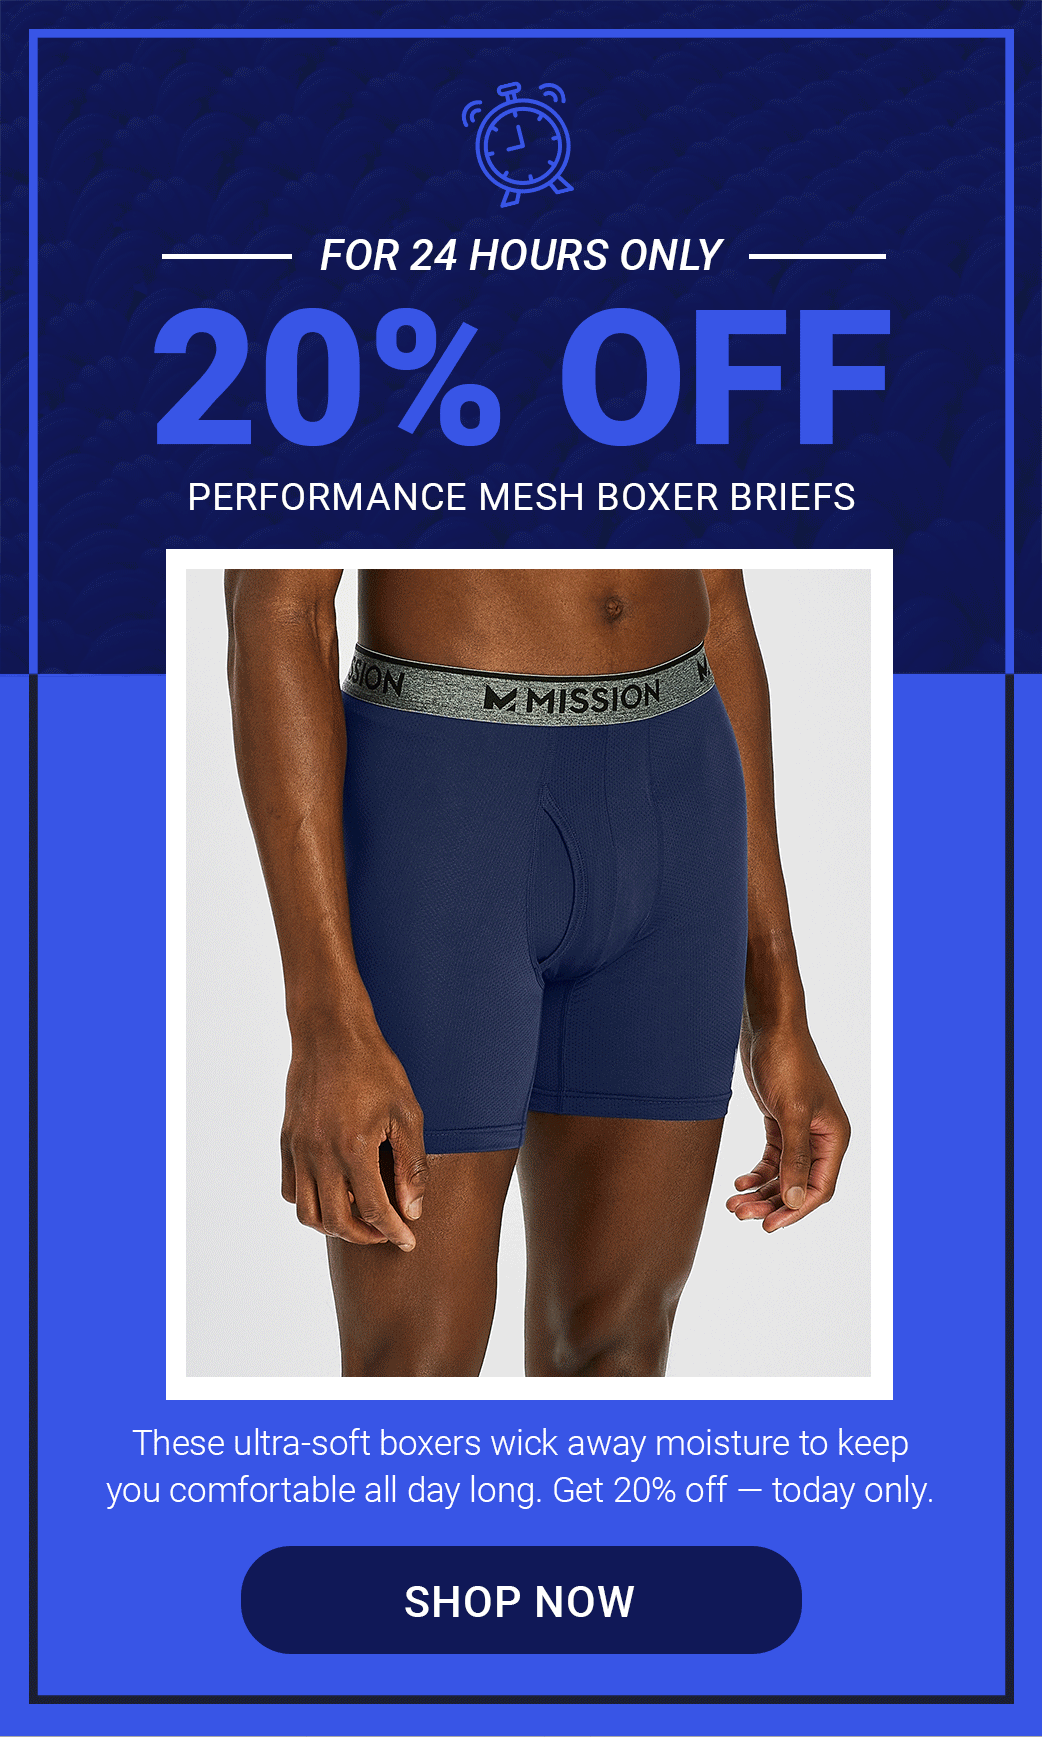 PERFORMANCE MESH BOXER BRIEFS 20% OFF FOR 24 HOURS ONLY. These ultra-soft boxers wick away moisture to keep you comfortable all day long. Get 20% off\xa0— today only. [SHOP NOW]